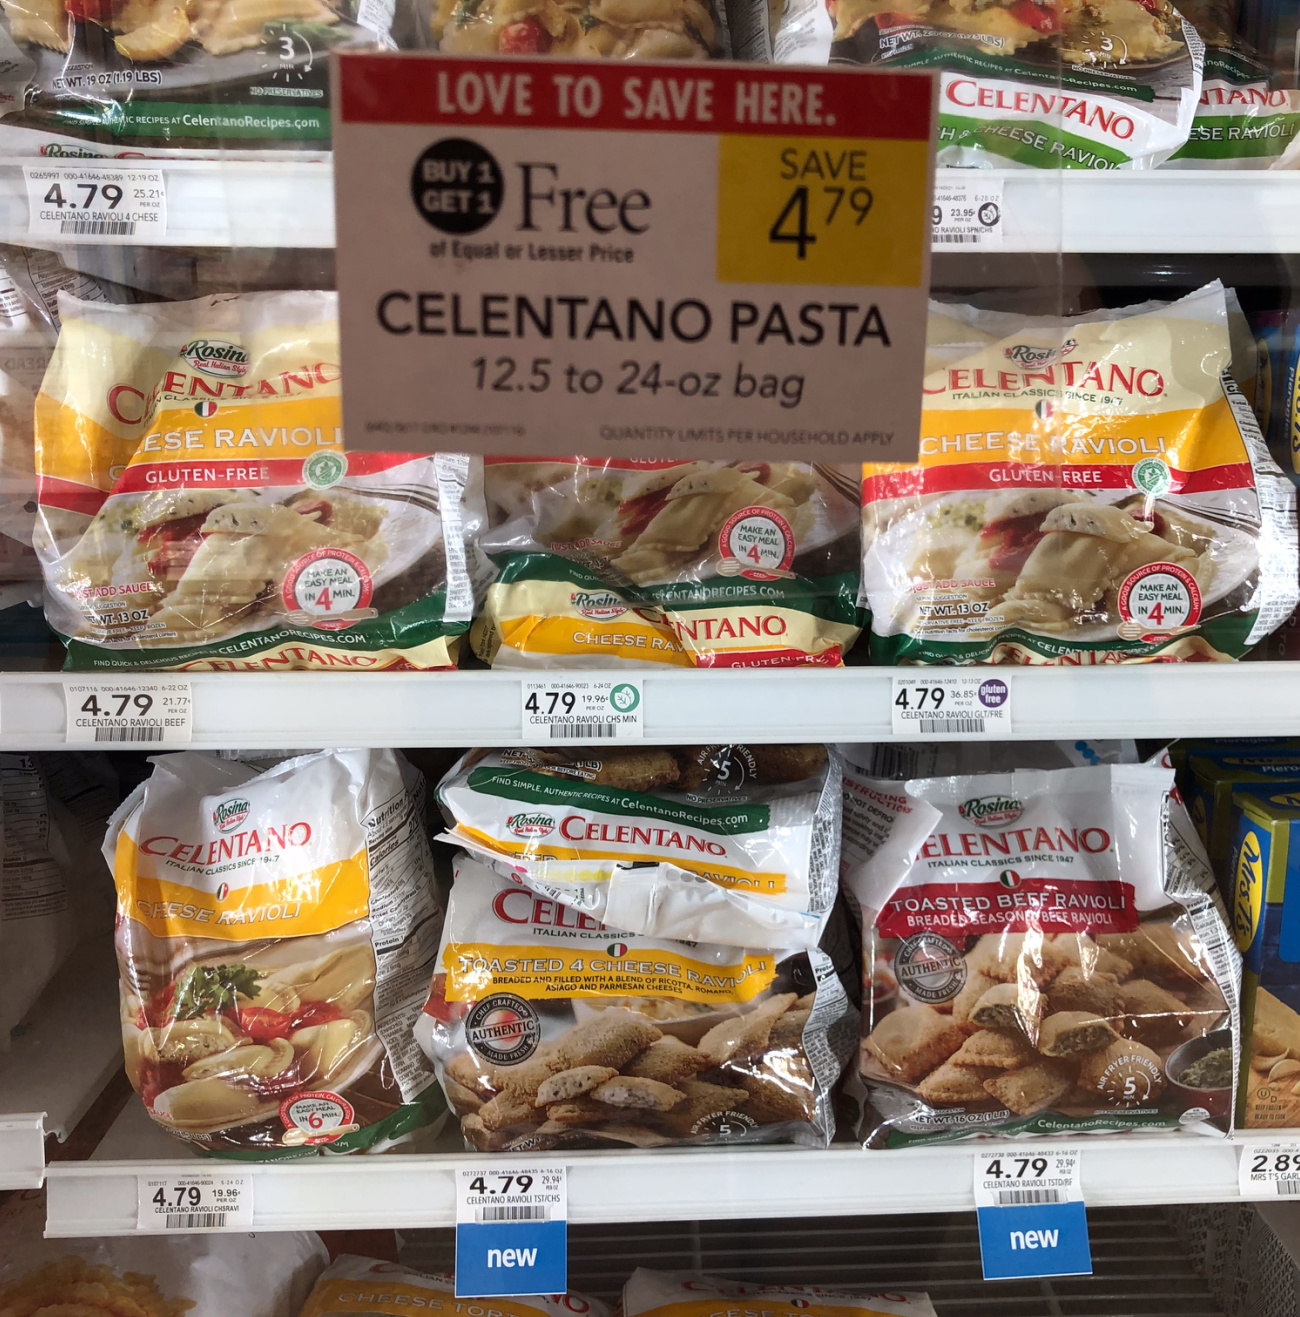 Try New Celentano Toasted Ravioli - On Sale Buy One, Get One FREE At Publix on I Heart Publix 4